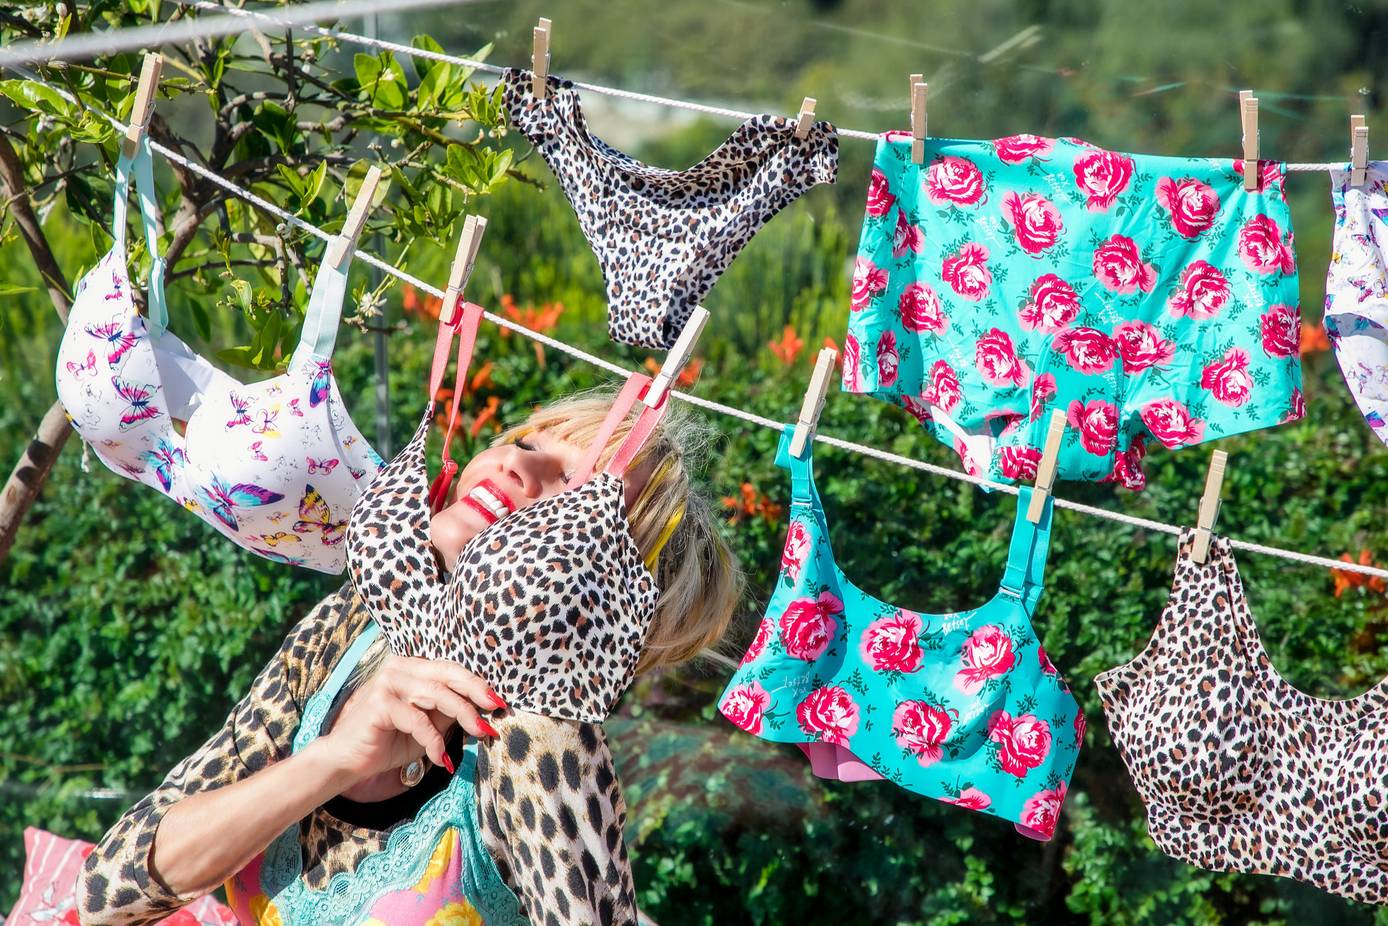 Knix and Betsey Johnson collaborate on lingerie and nightwear